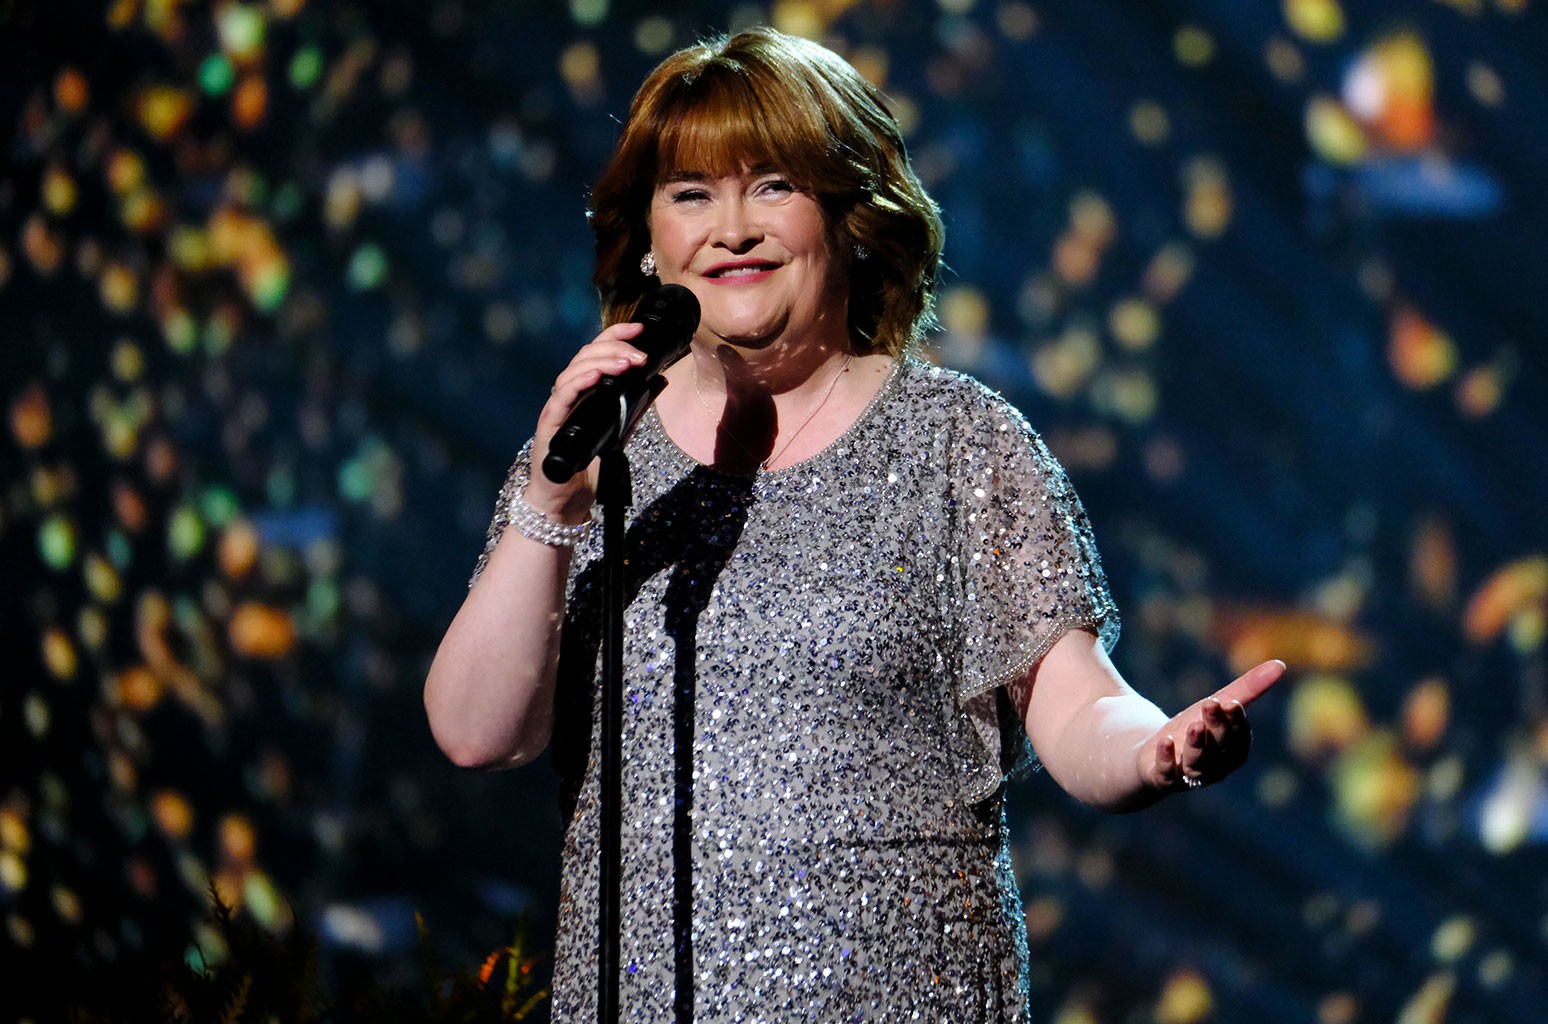 Susan Boyle Soars With Signature 'I Dreamed a Dream' on 'America's Got